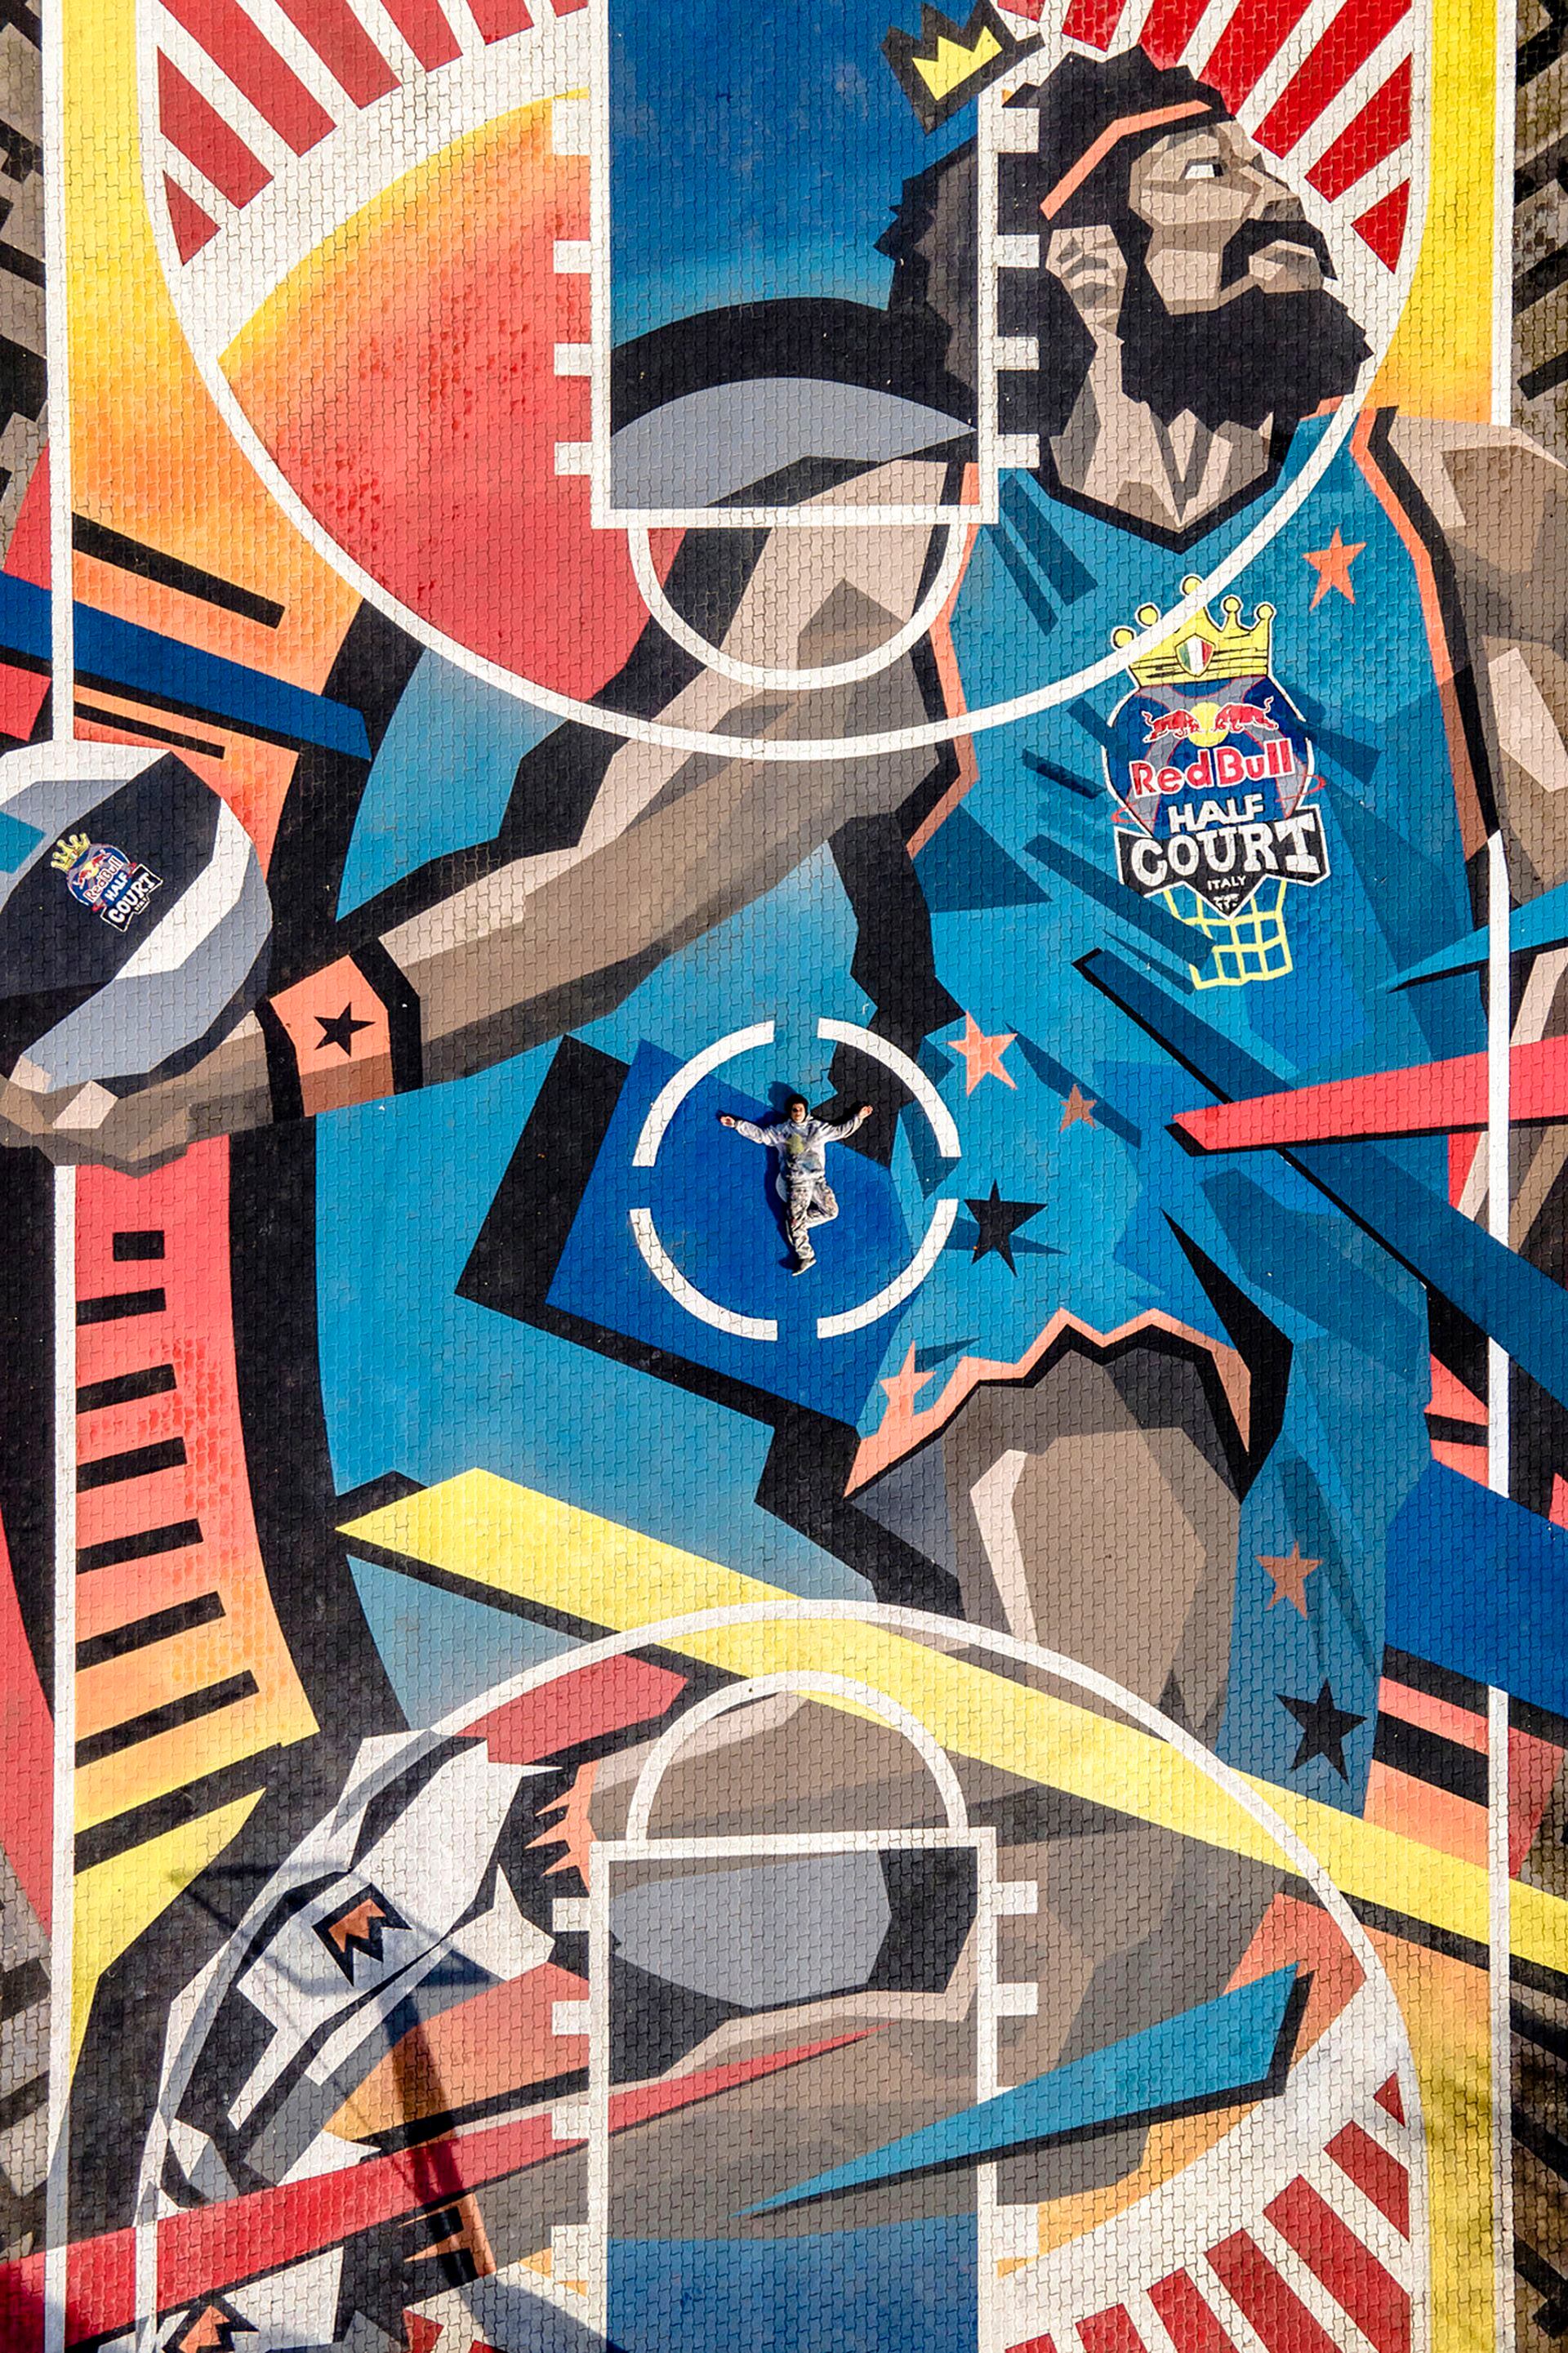 PISKV poses for a portrait on the Red Bull Half Court basketball court in Rome, Italy